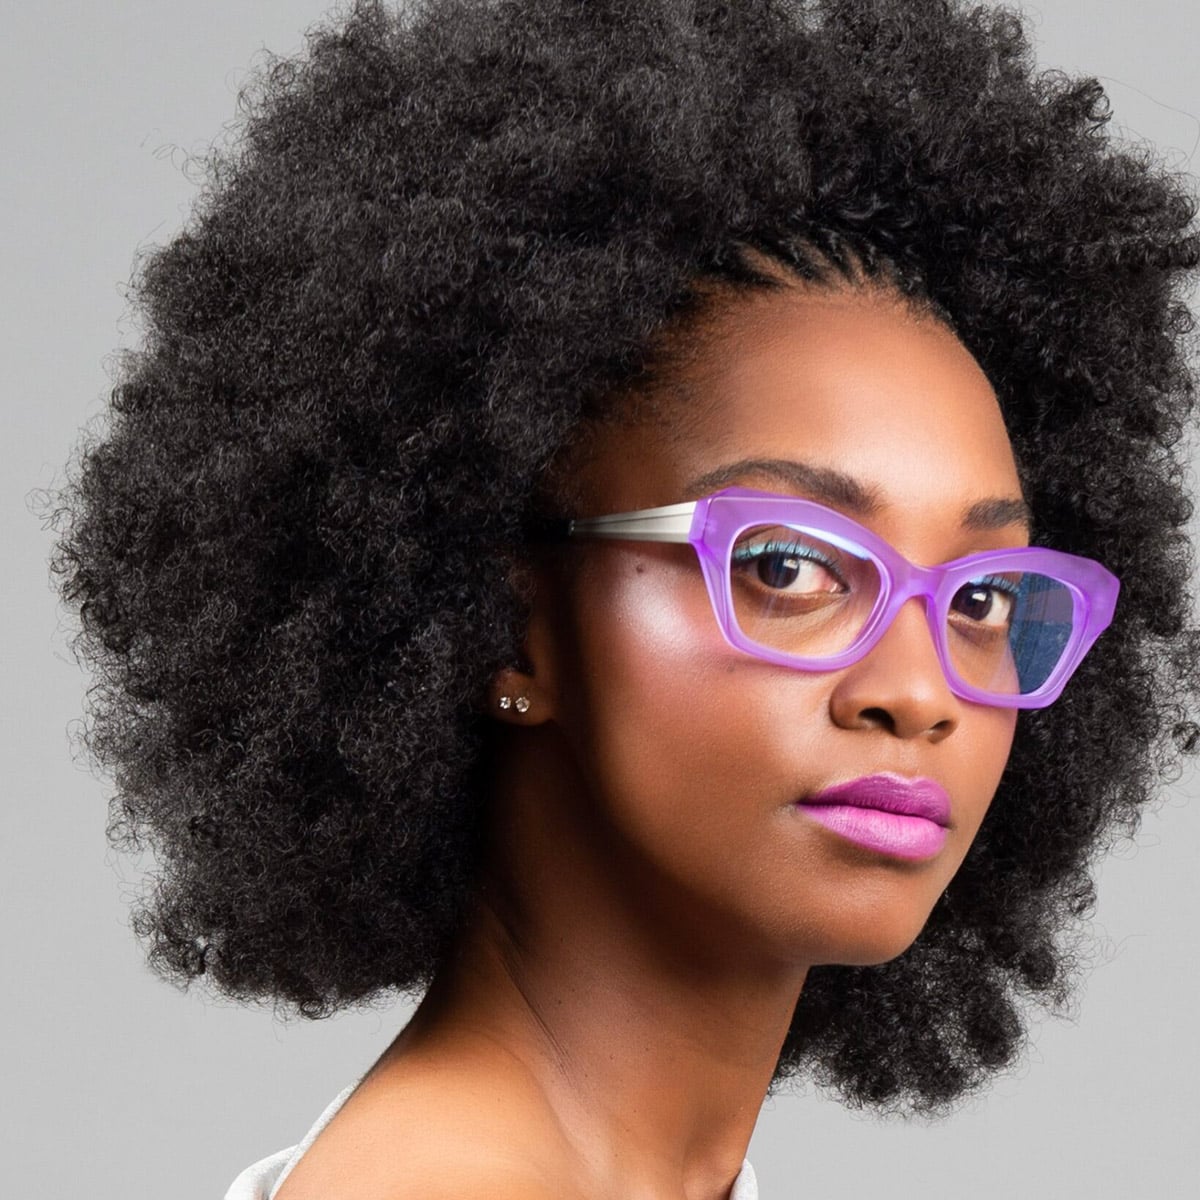 Kirk & Kirk™ Layla 54 - Indigo - stylish purple glasses can transform your image from simple to sophisticated
